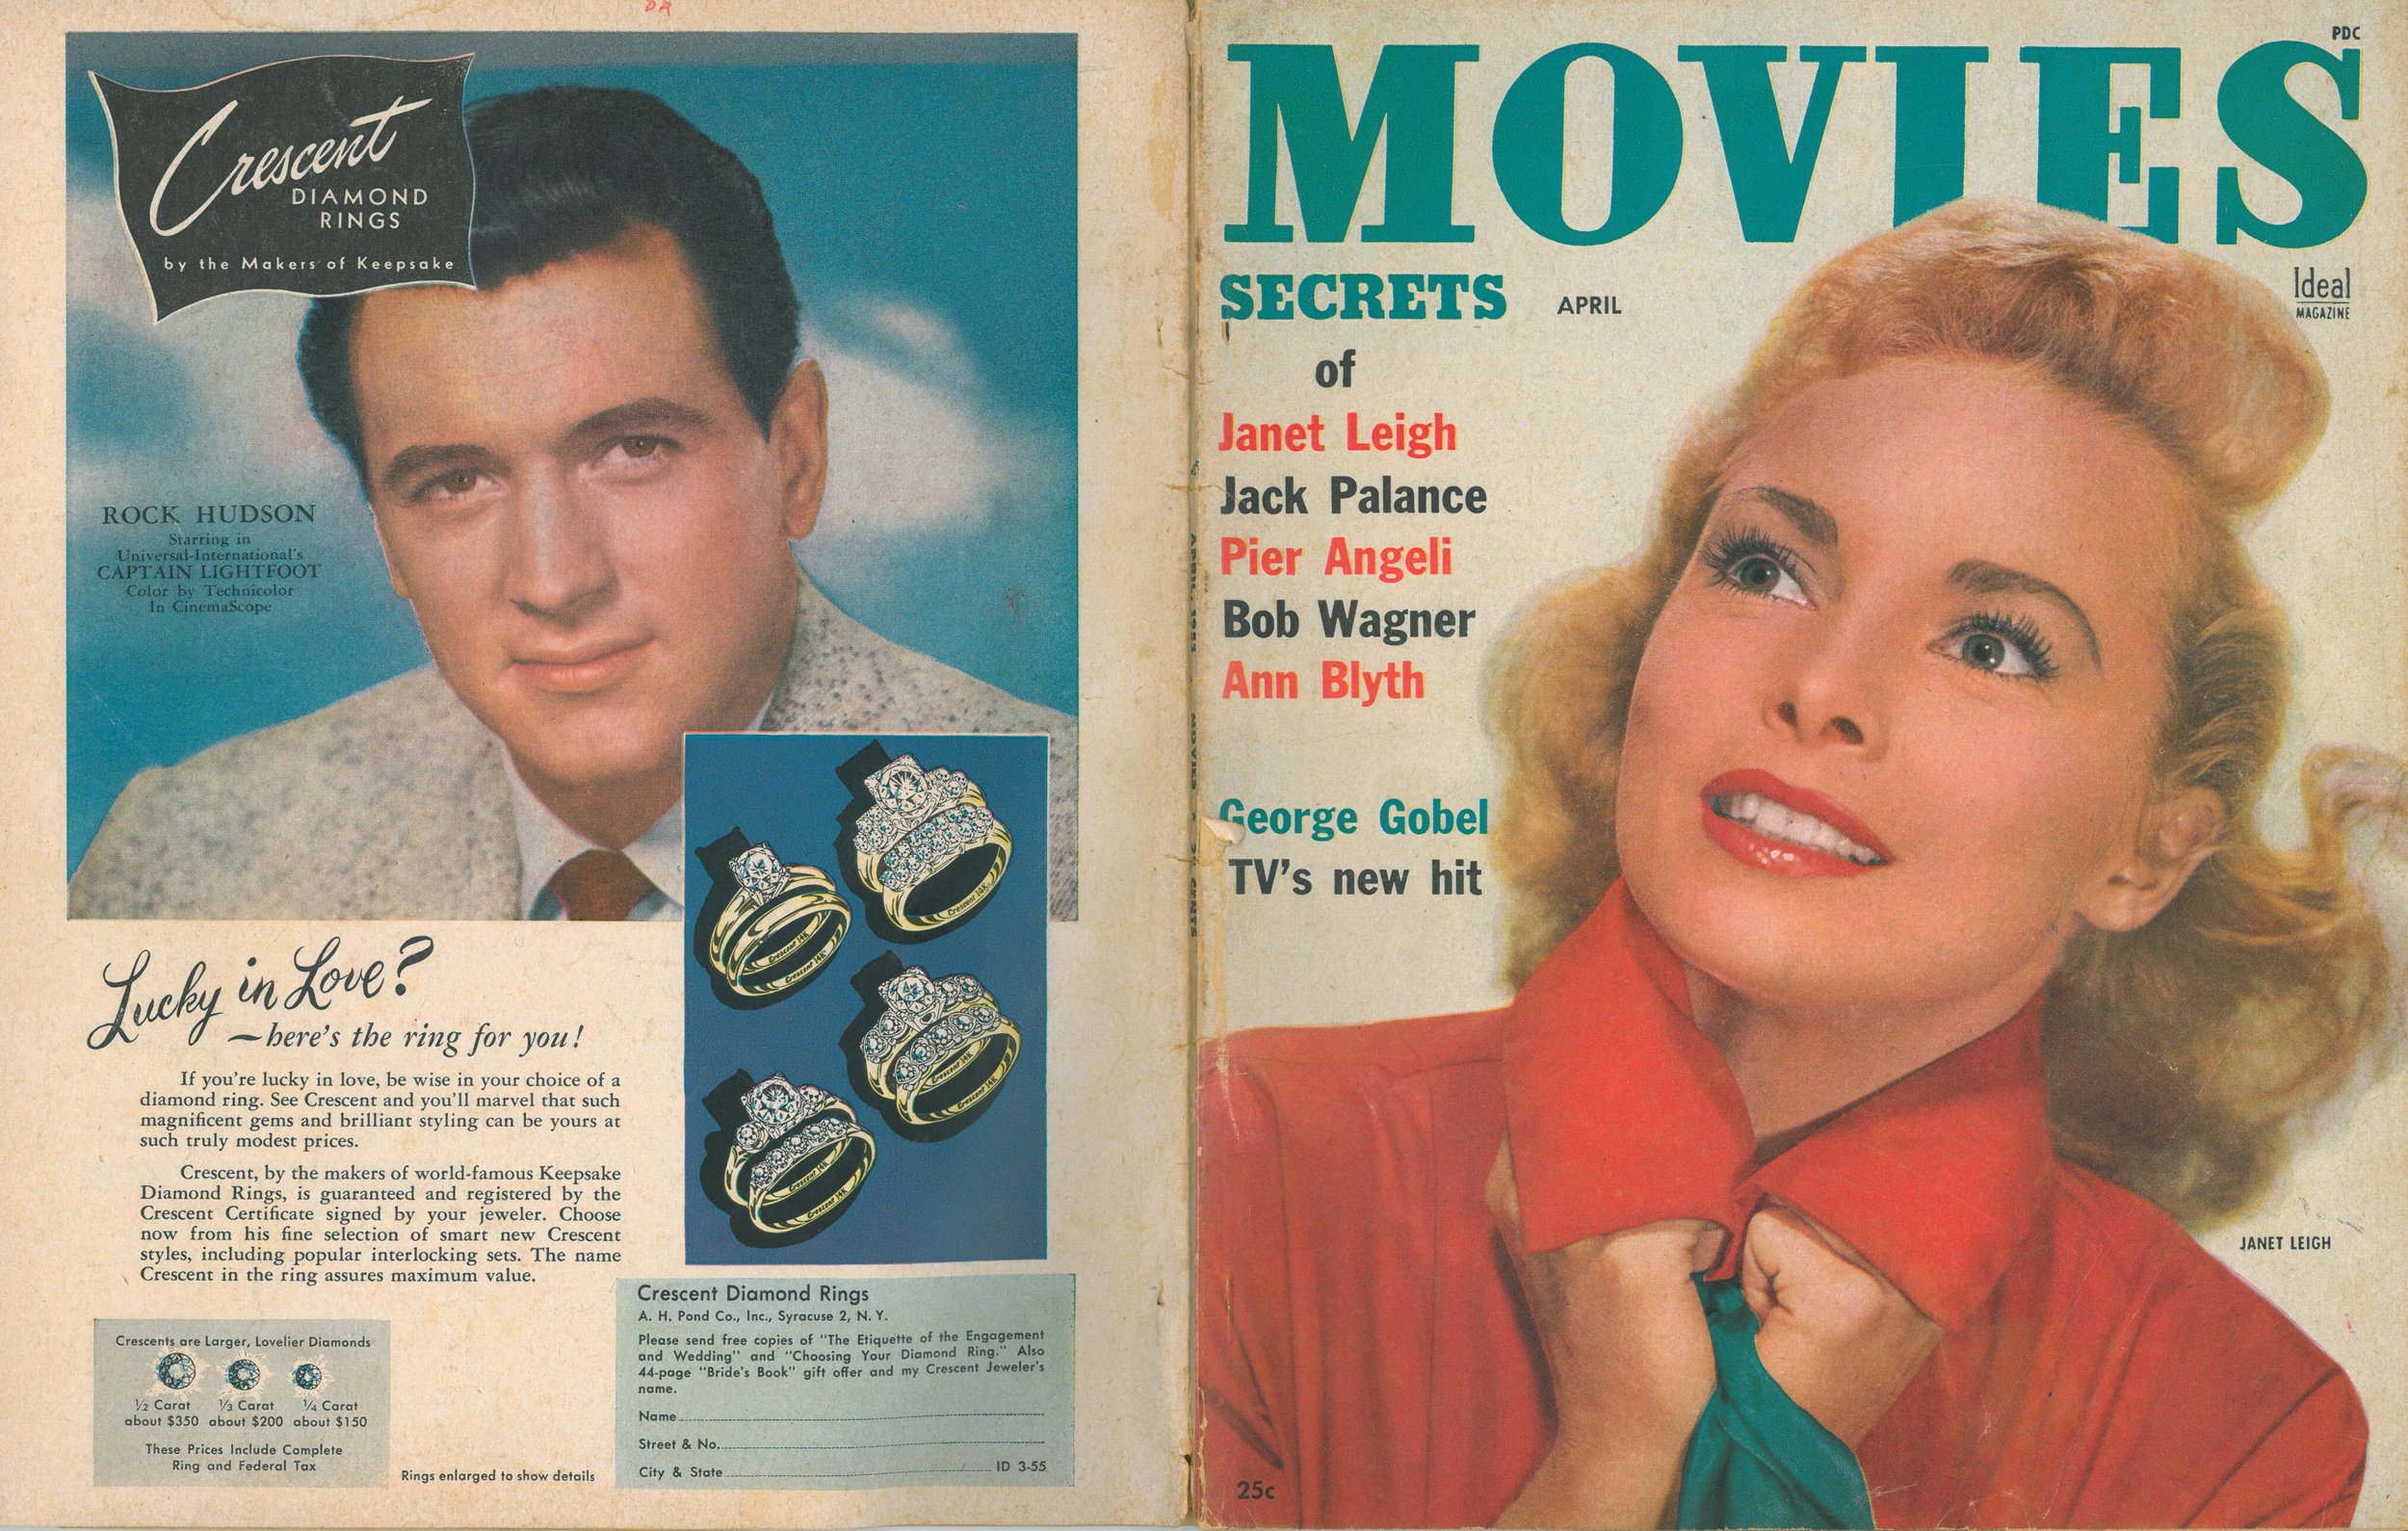   Movies , April 1955, on newsstands in early March 1955. Below: Fall 1954.  Bob was not yet “big” enough to be offered endorsement opportunities such as this one with Rock Hudson. Many such endorsements were developed by the studio publicity departm